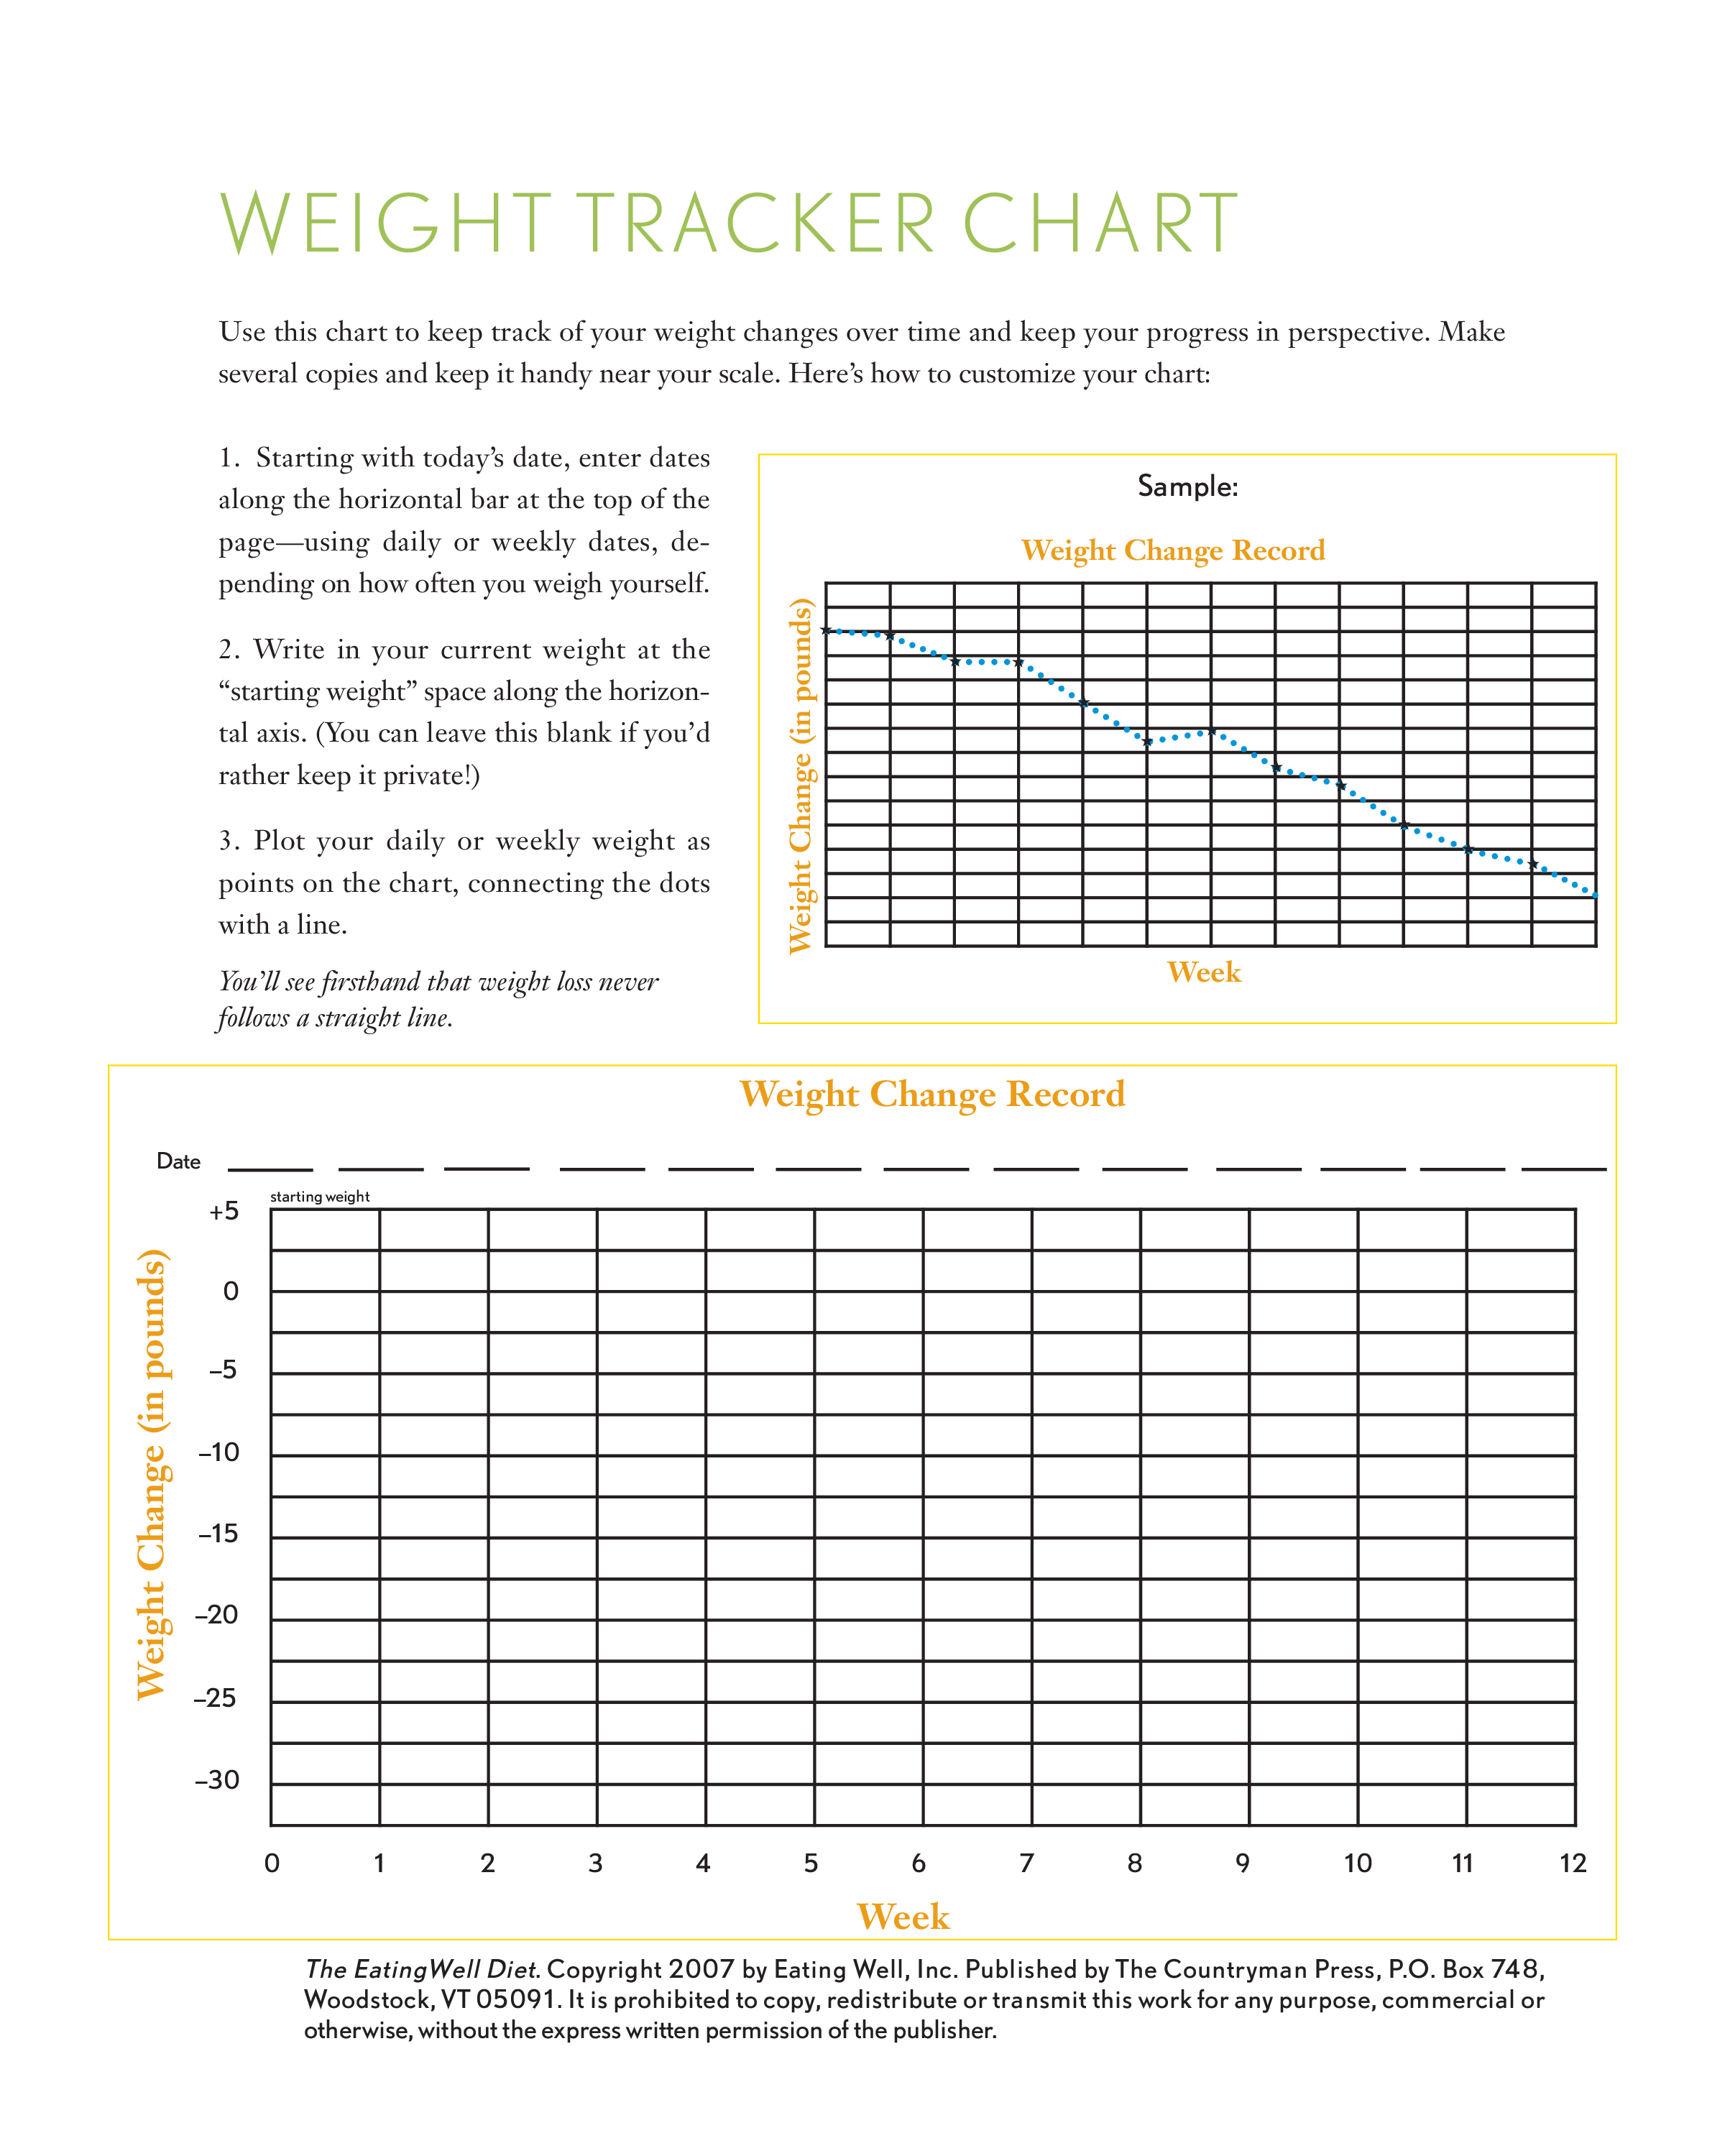  Weekly Weight Loss Tracking Chart Allbusinesstemplates